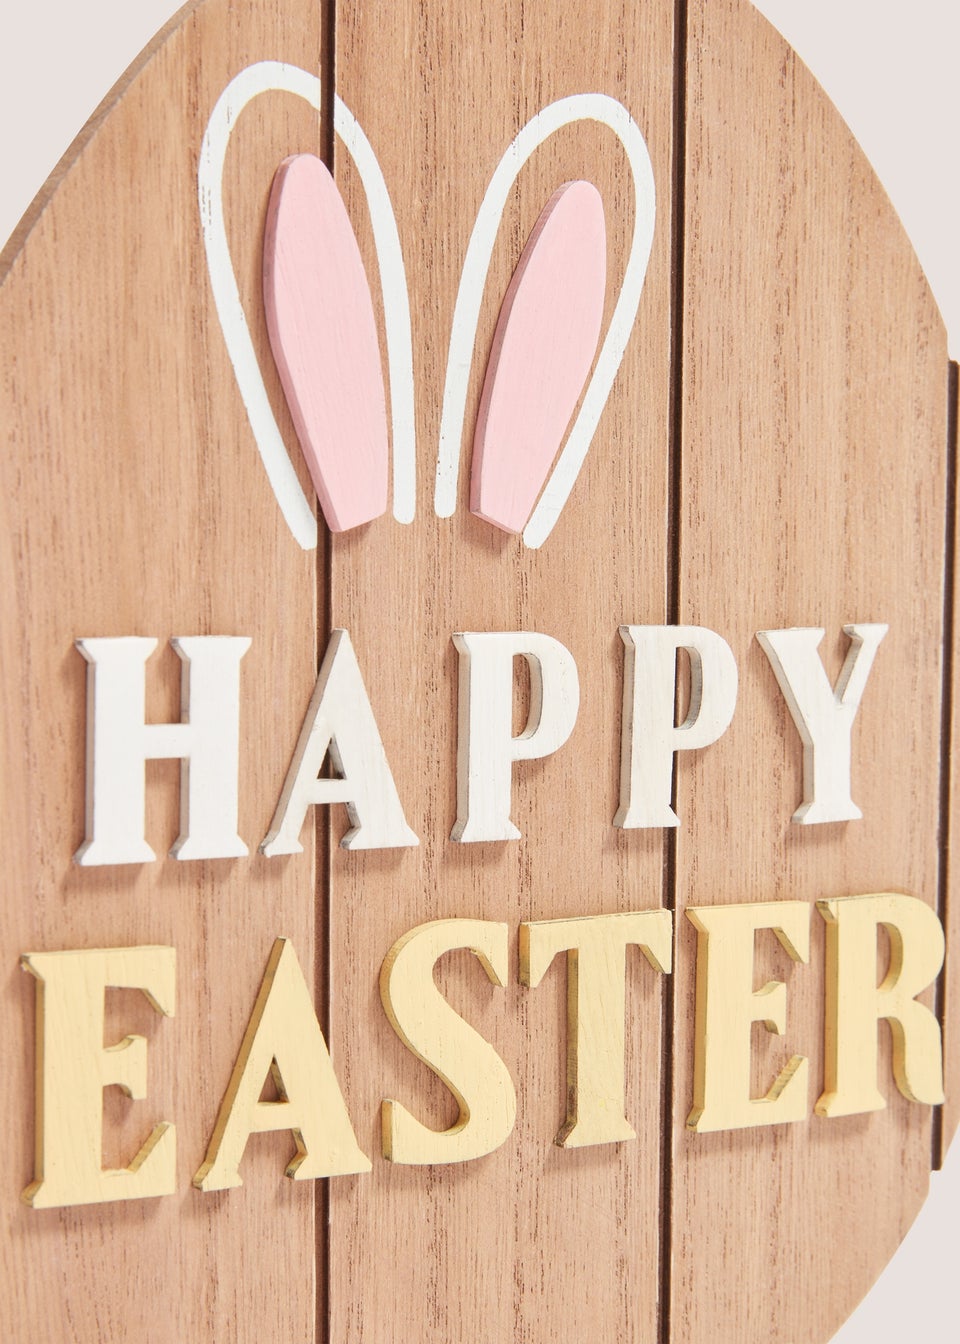 Wooden Happy Easter Sign (18cm x 21.7cm)